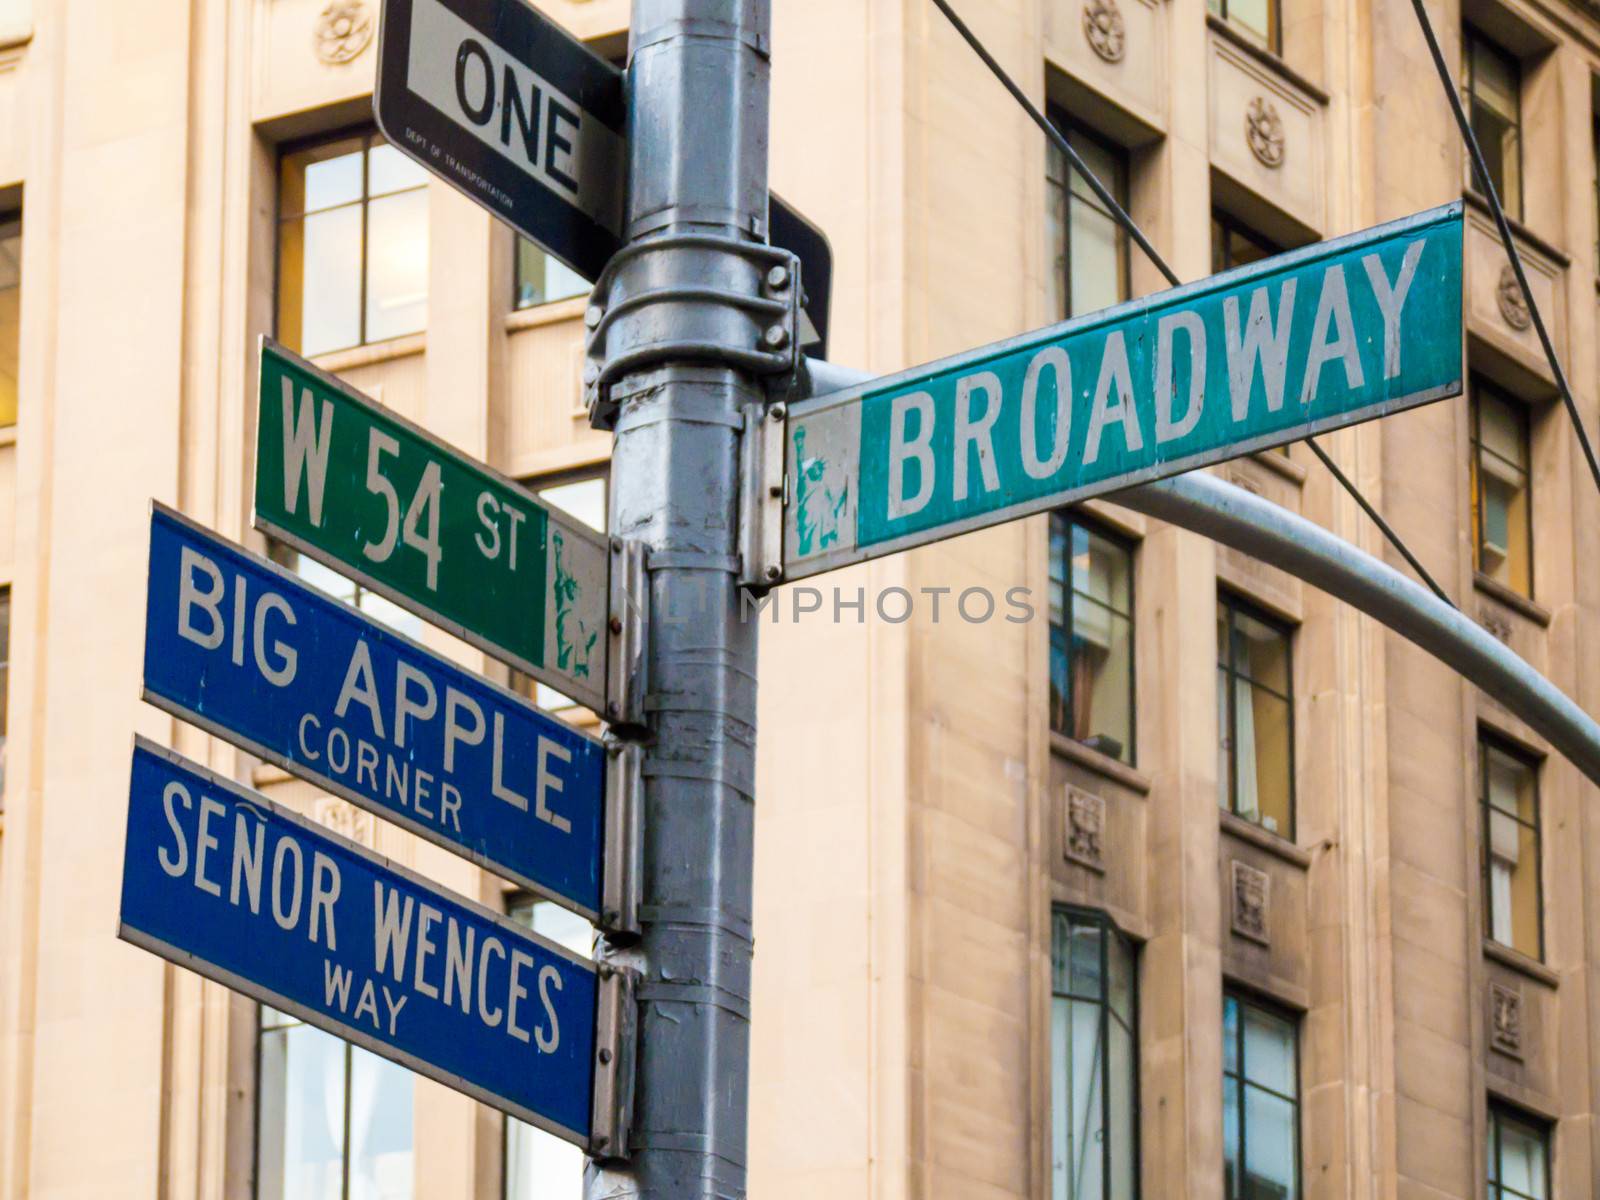 famous street sign for the Broadway in manhattan